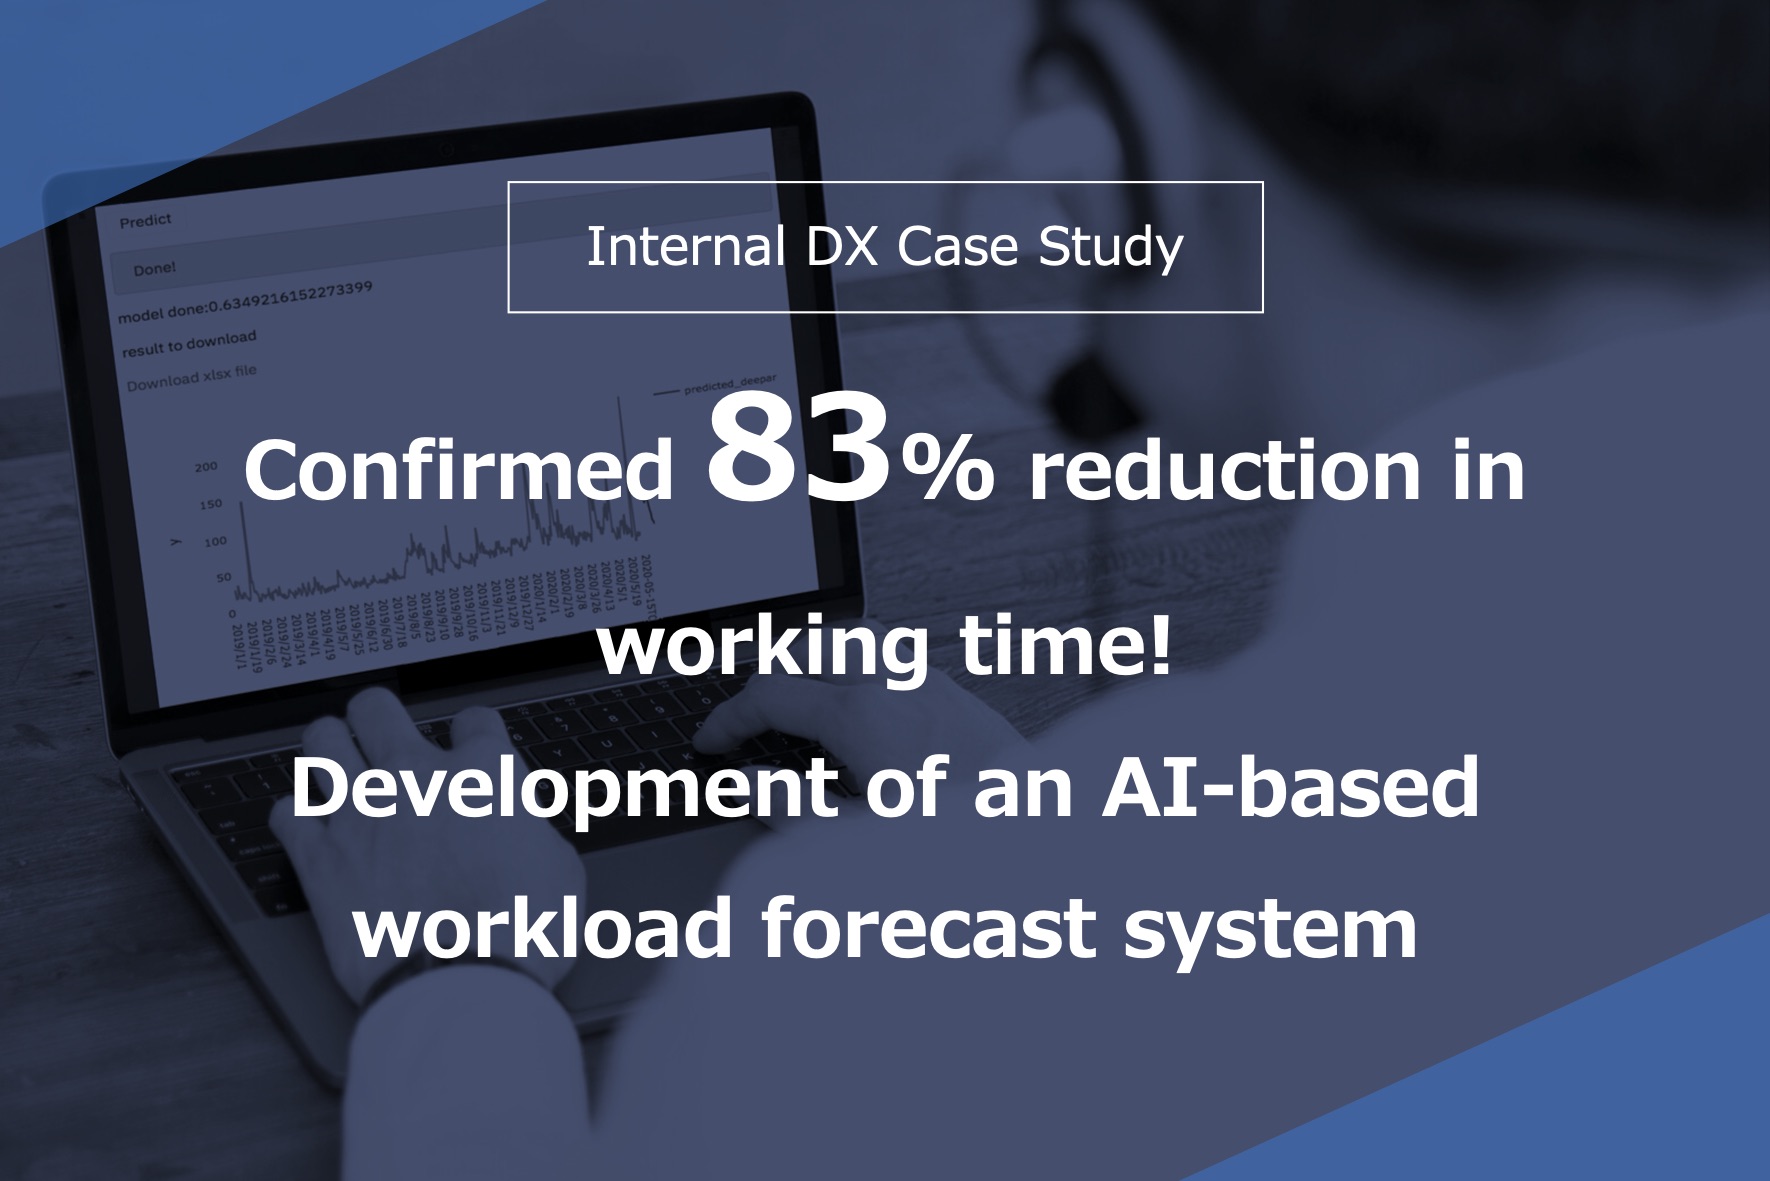 LINE Fukuoka Develops an AI-Based Workload Forecast System - One Unified Forecasting Platform for Everything from Product Demand to Recruitment サムネイル画像